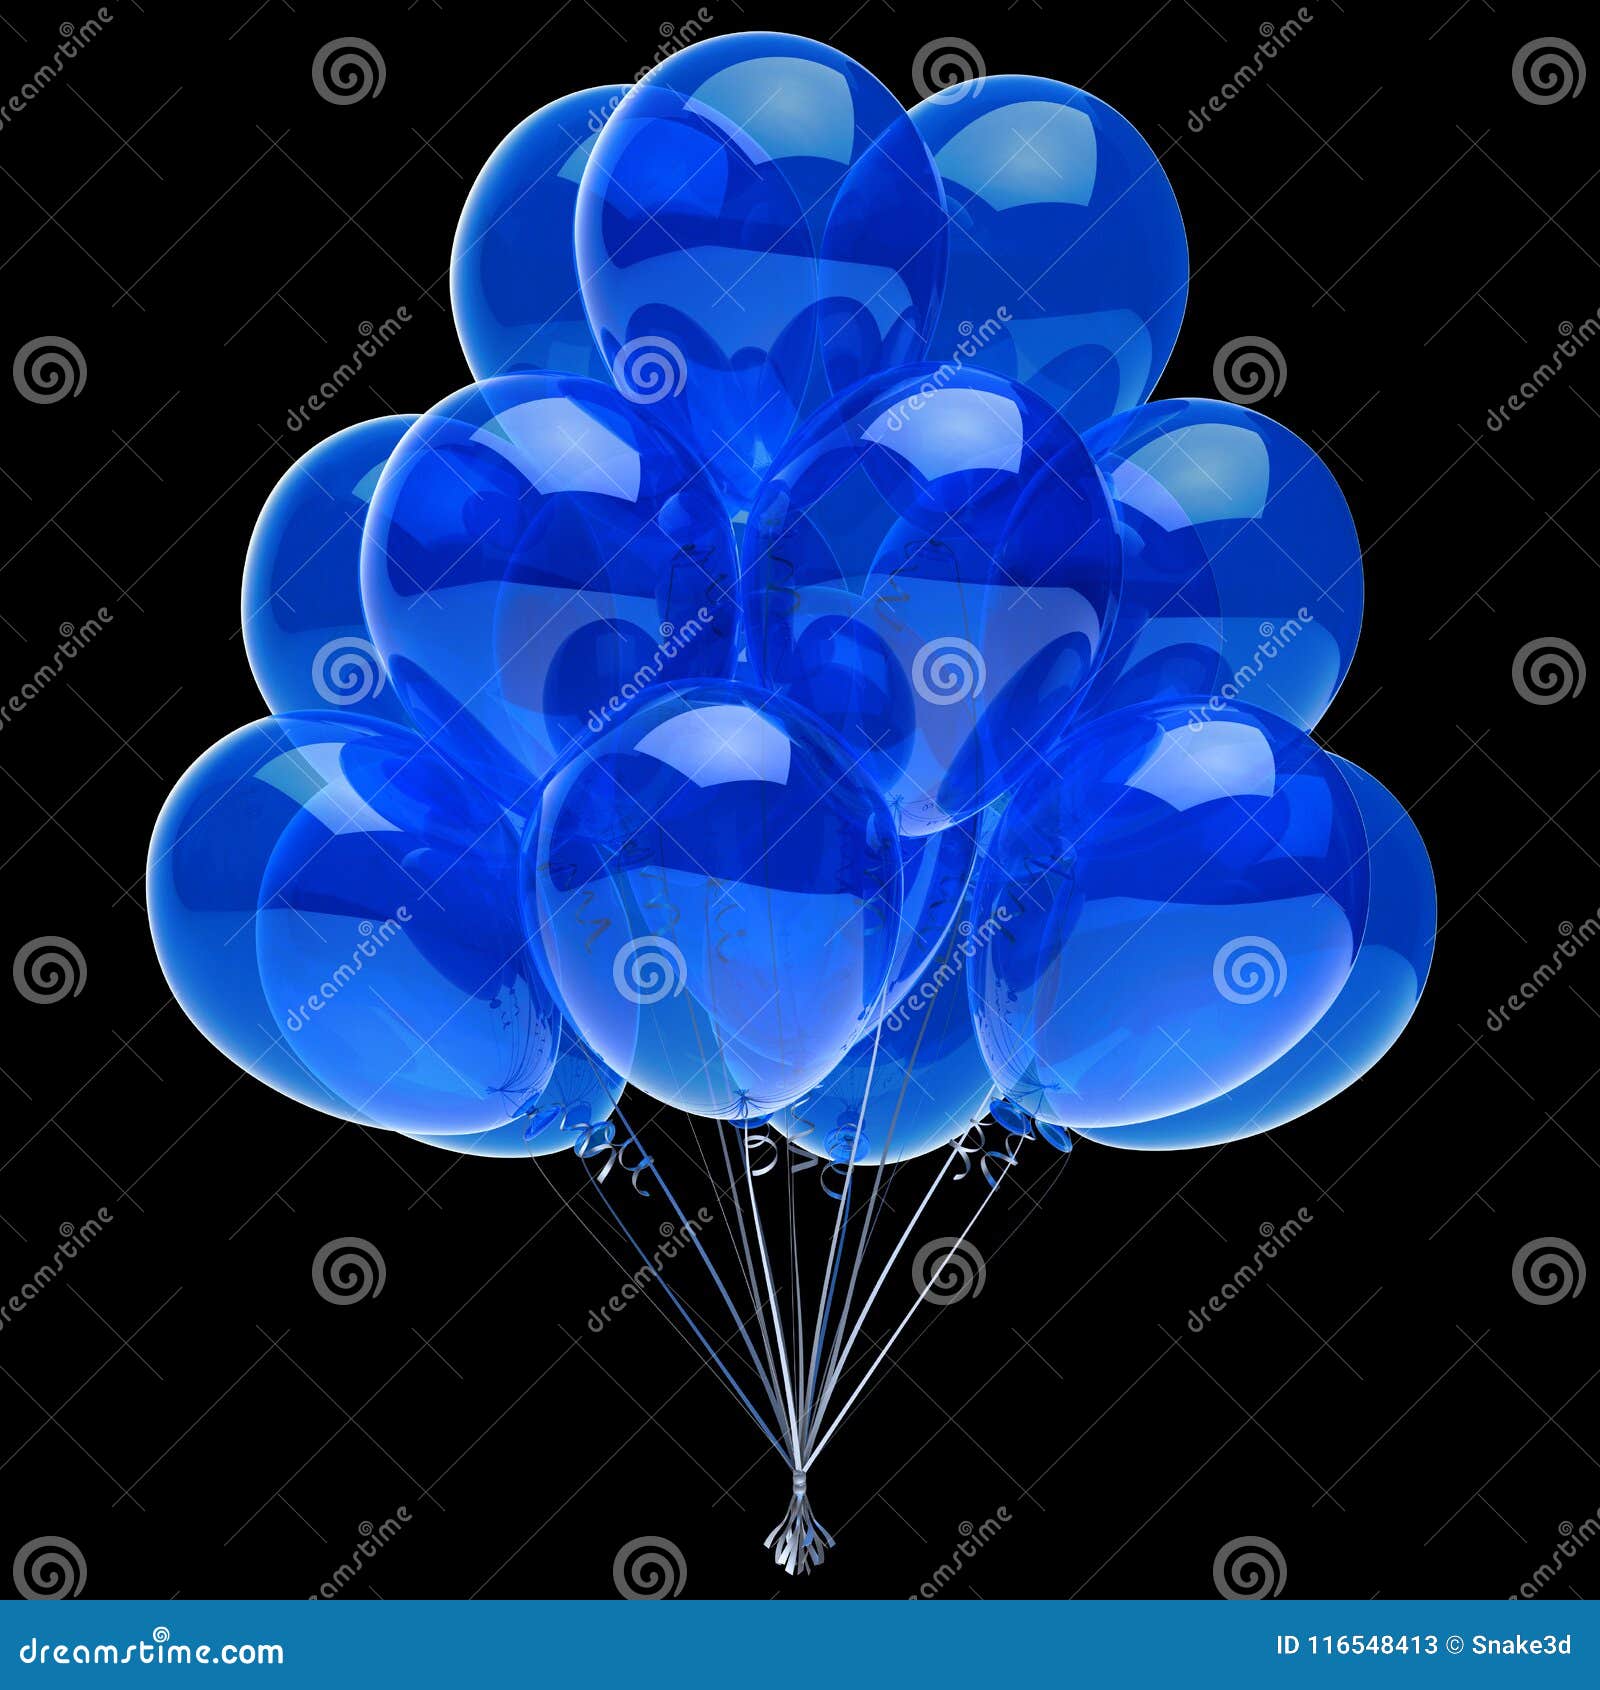 Air balloon bright blue decoration with ribbon Vector Image